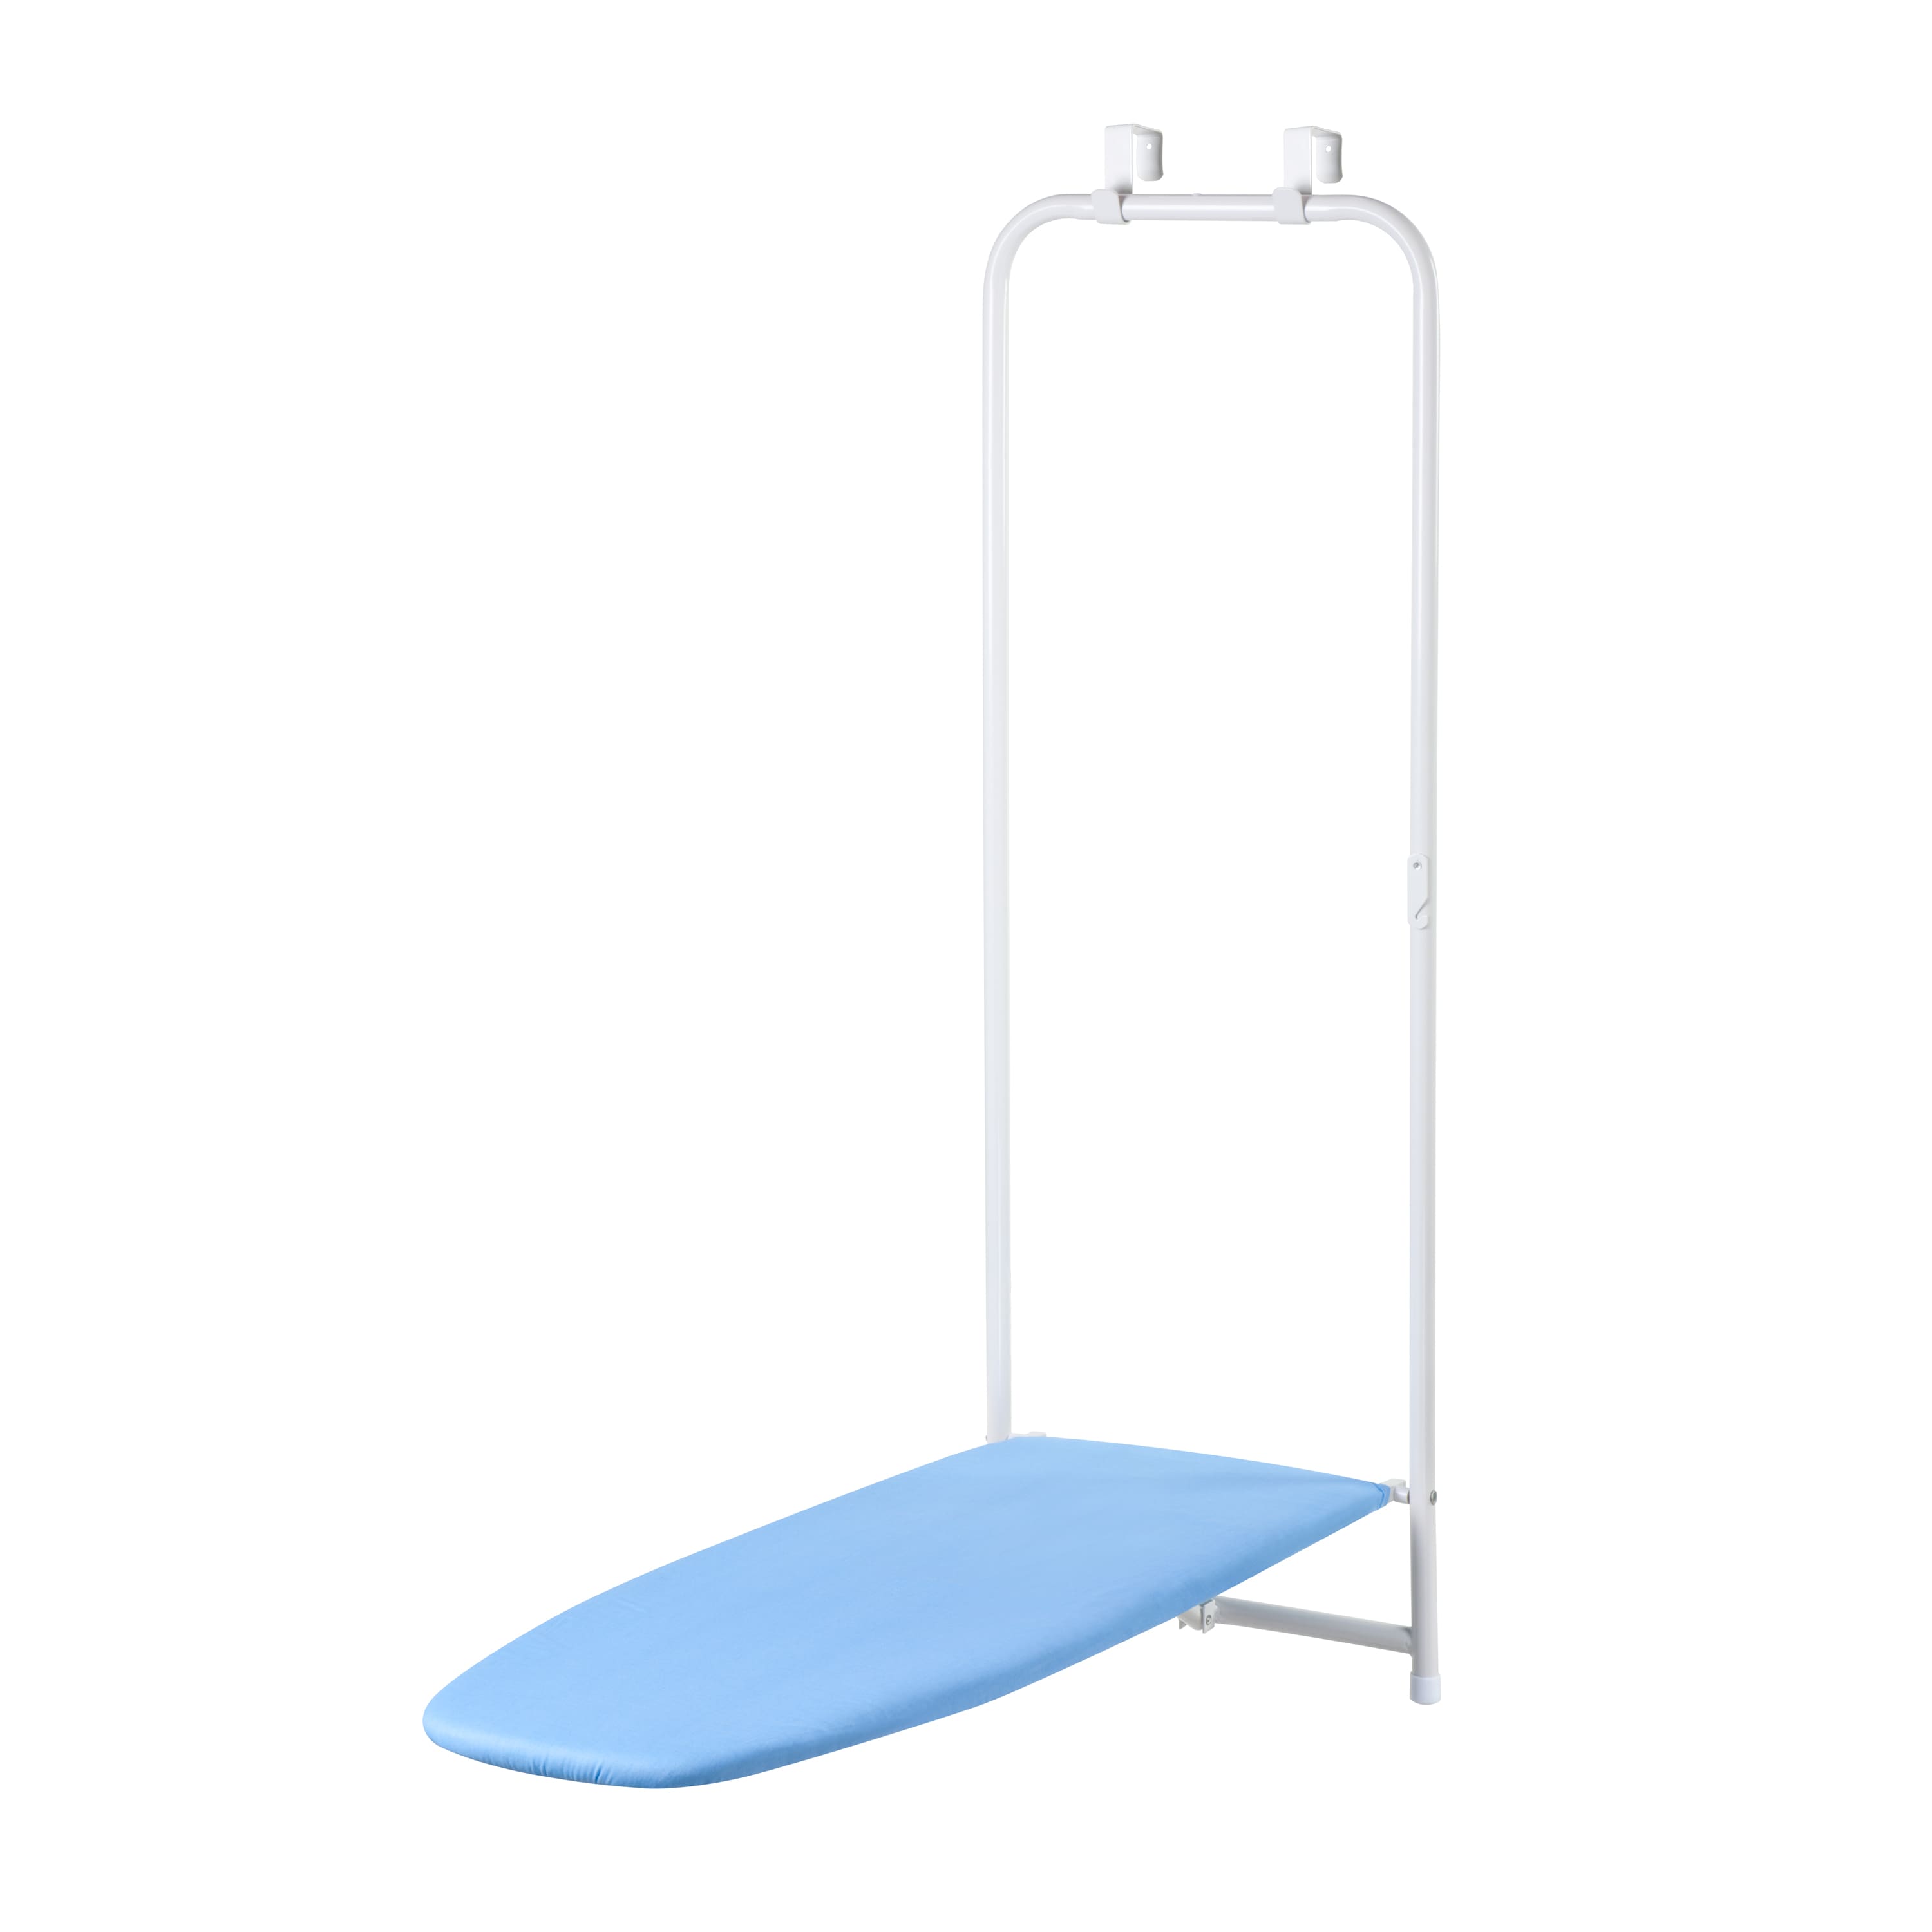 Honey Can Do Over-the-Door Hanging Ironing Board